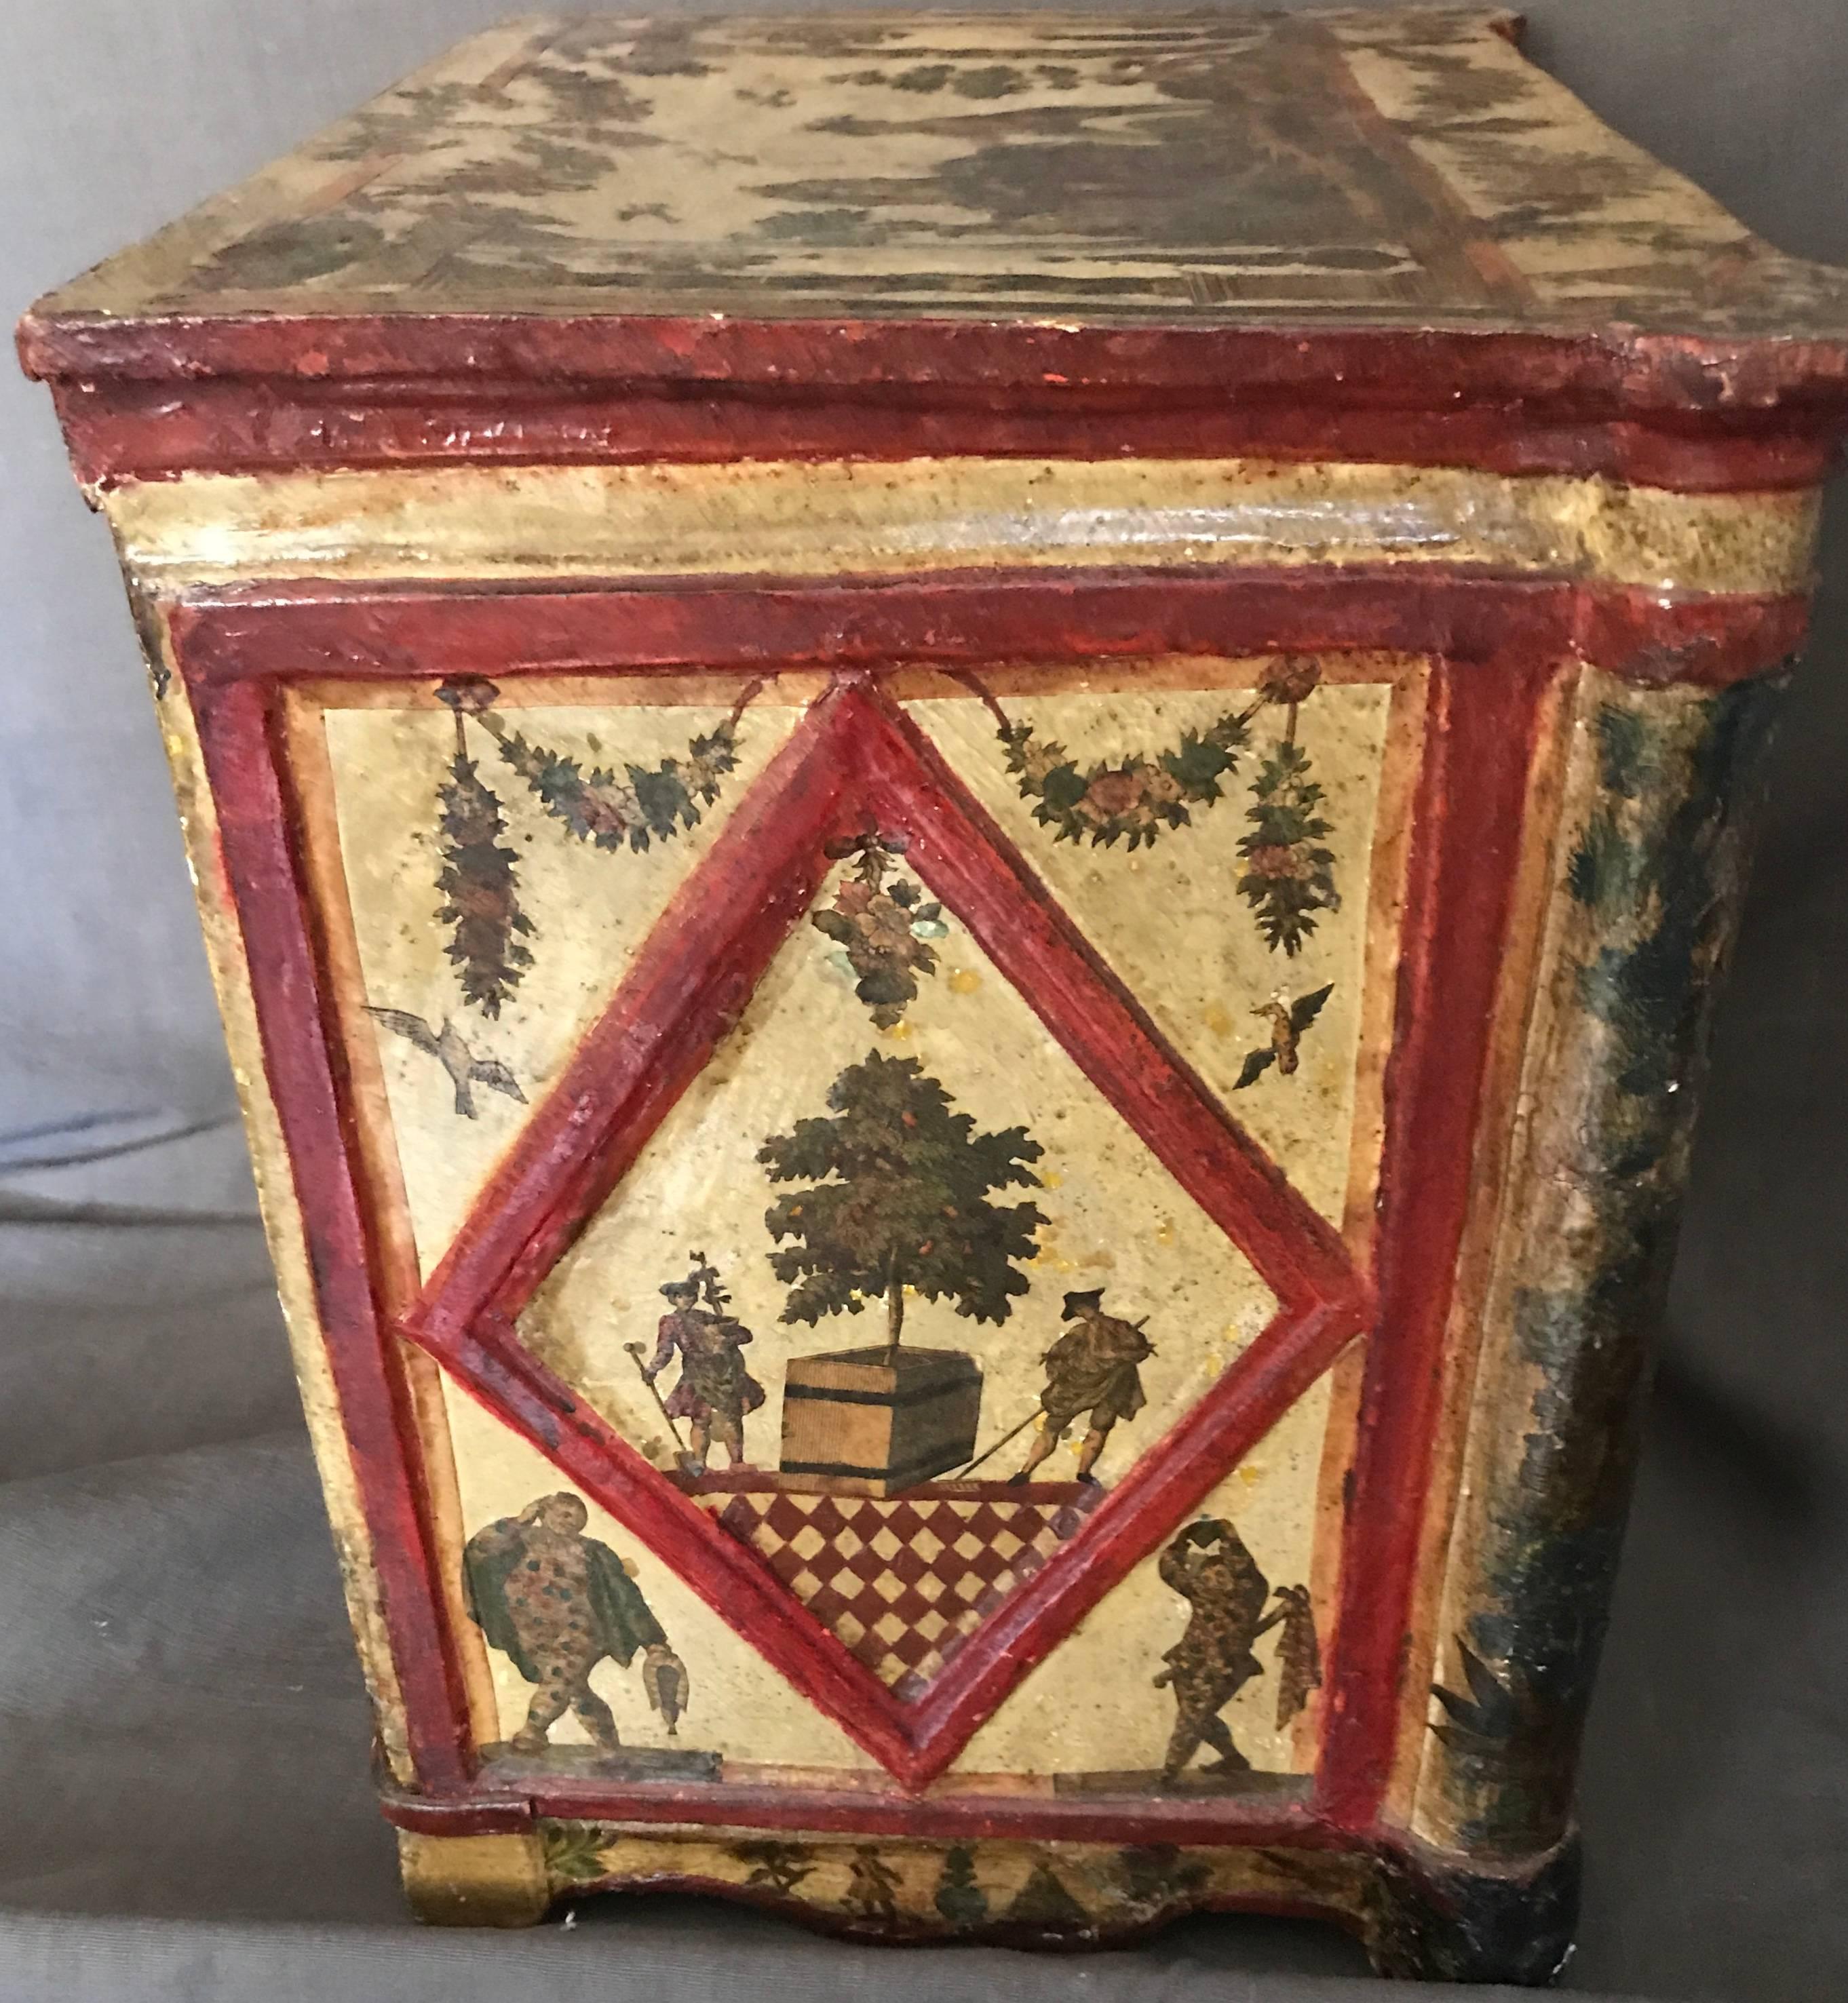 Large rare lacca povera chinoiserie jewelry box with three drawers and decorations on all sides. Rare and impressive Venetian chest of drawers with rich coloring in ochre, green, blue and Chinese red, with chinoiserie figures, palm trees. pagodas,